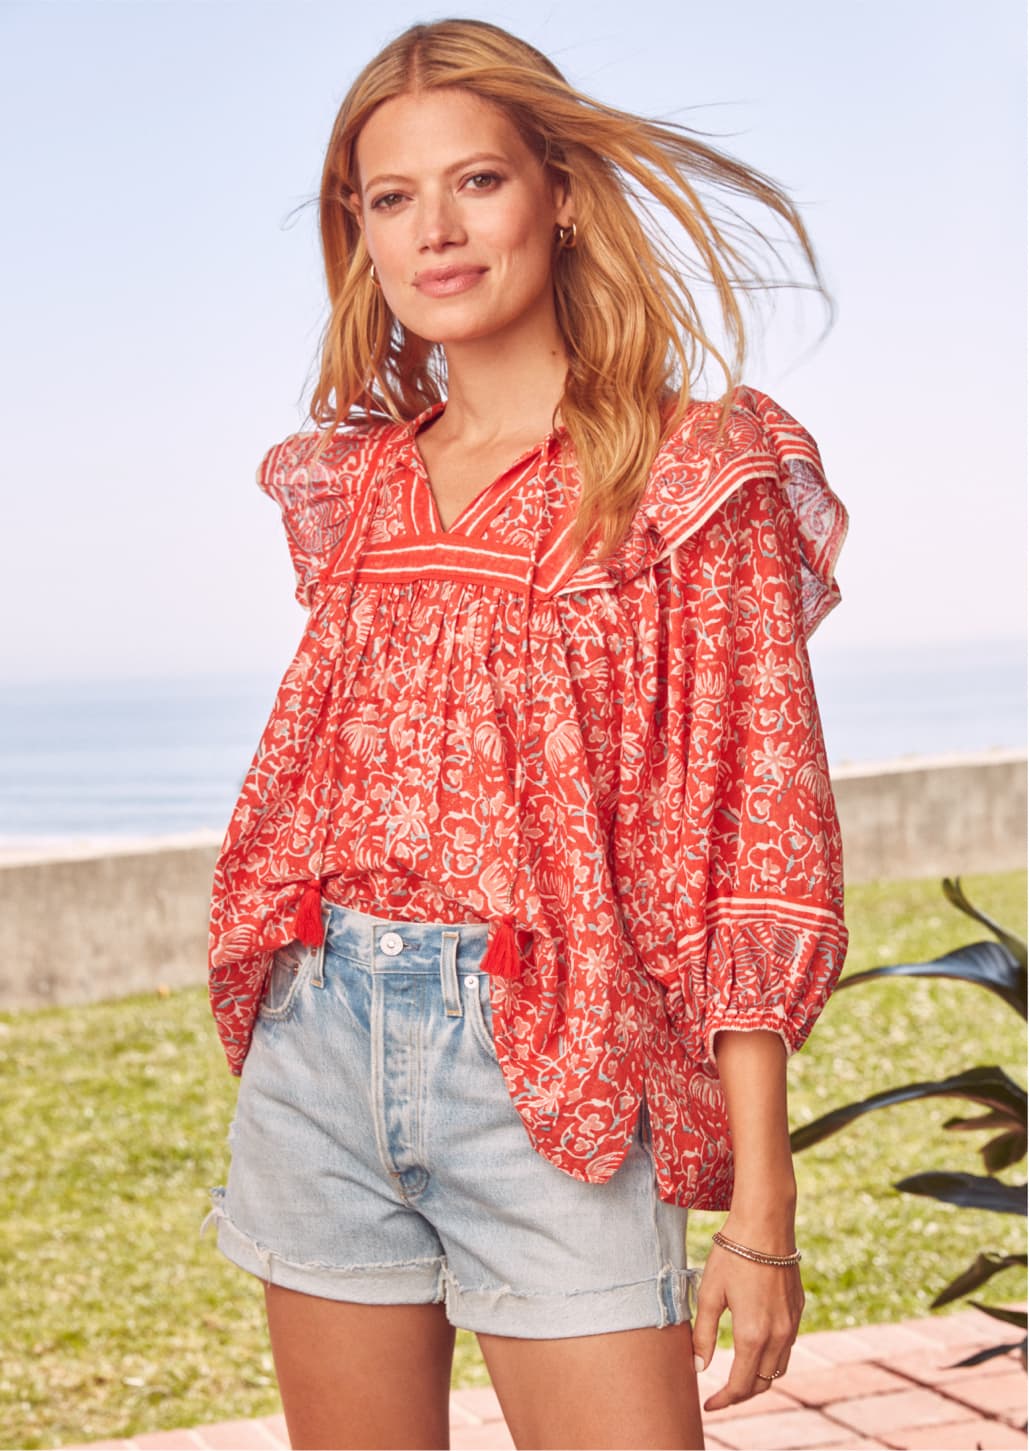 woman wearing a floral, ruffled statement top